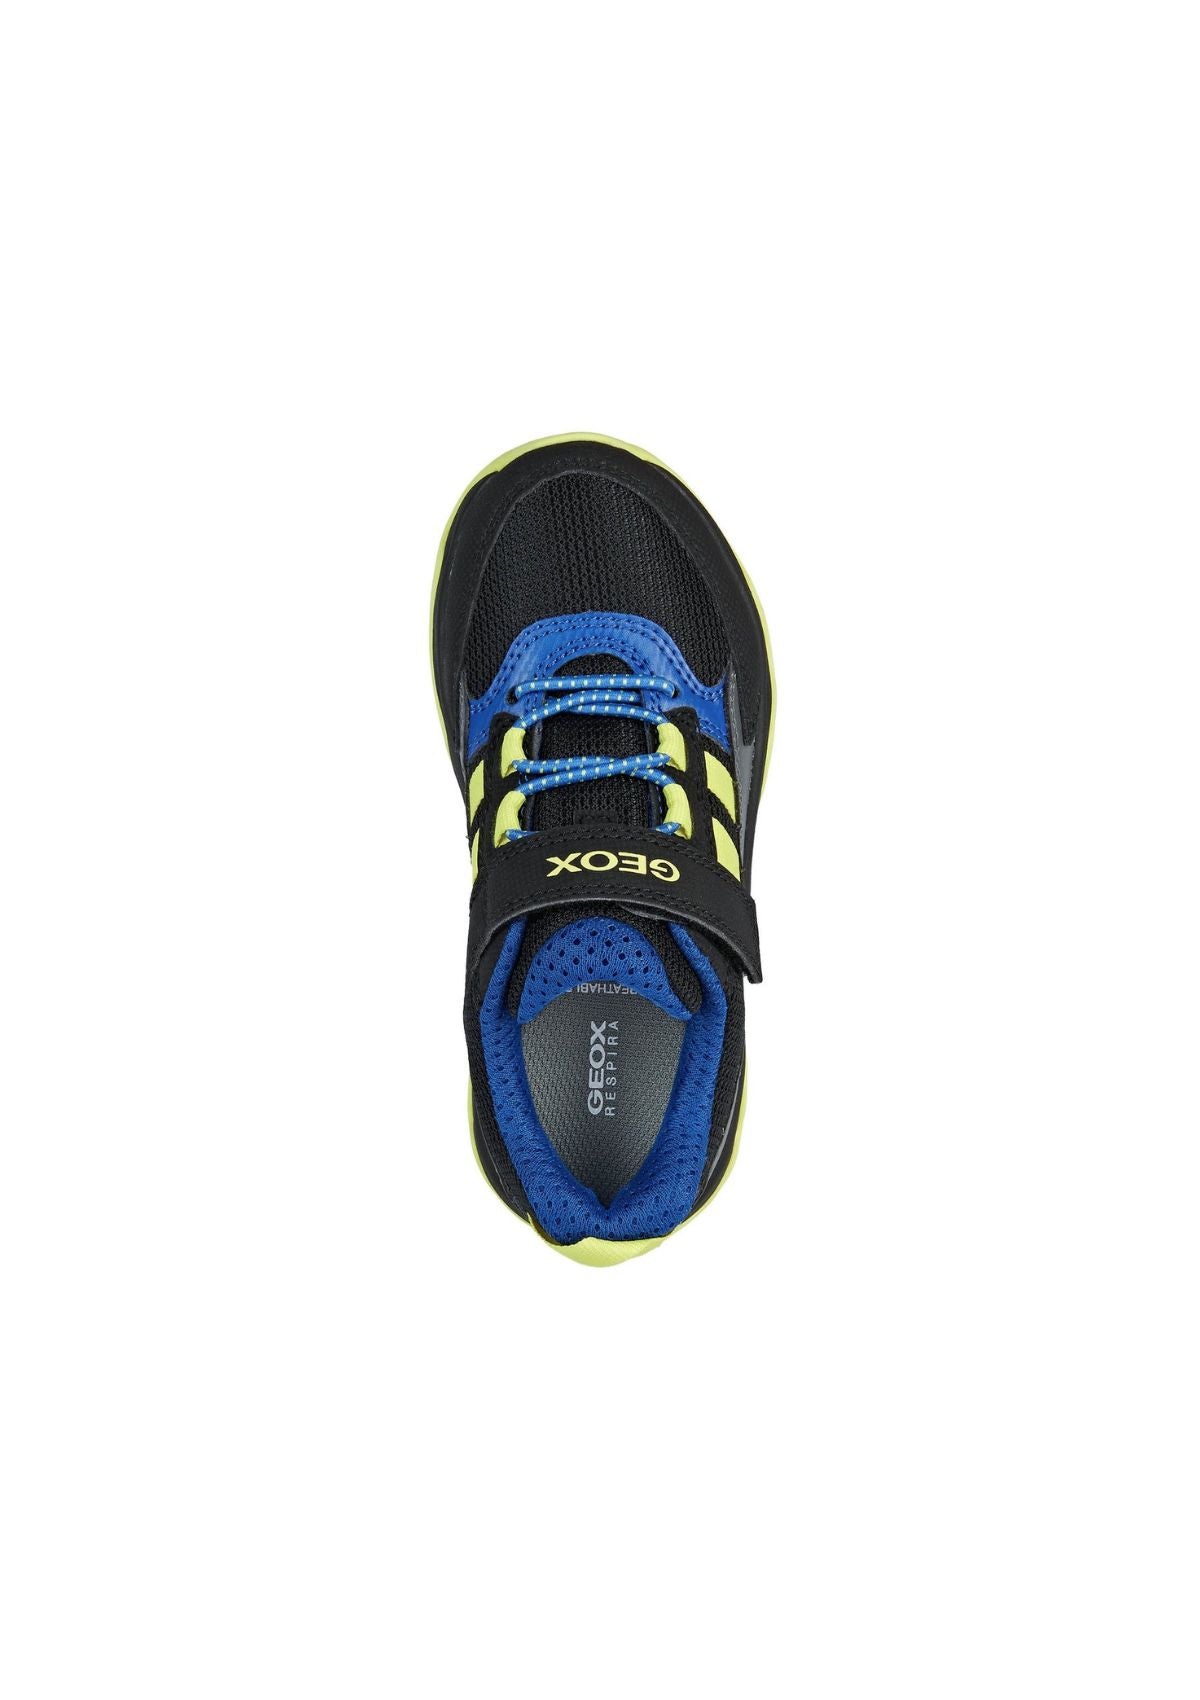 Geox Boys CALCO Trainers Black Lime  up